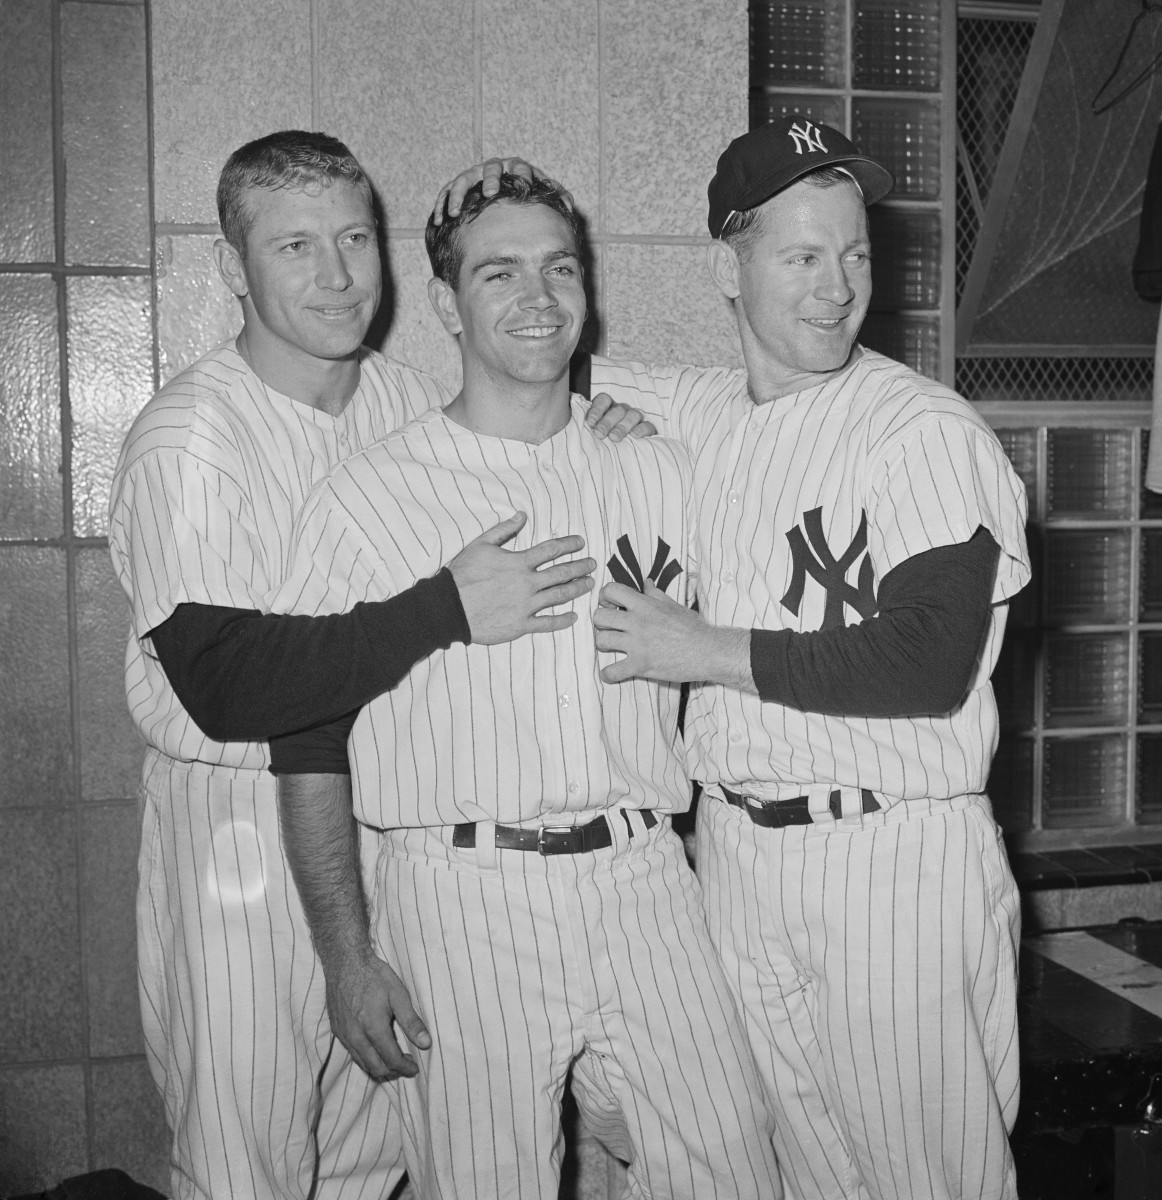 Mickey Mantle and Whitey Ford celebrate with Richardson after Game 3. Photo: Bettmann/Getty Images